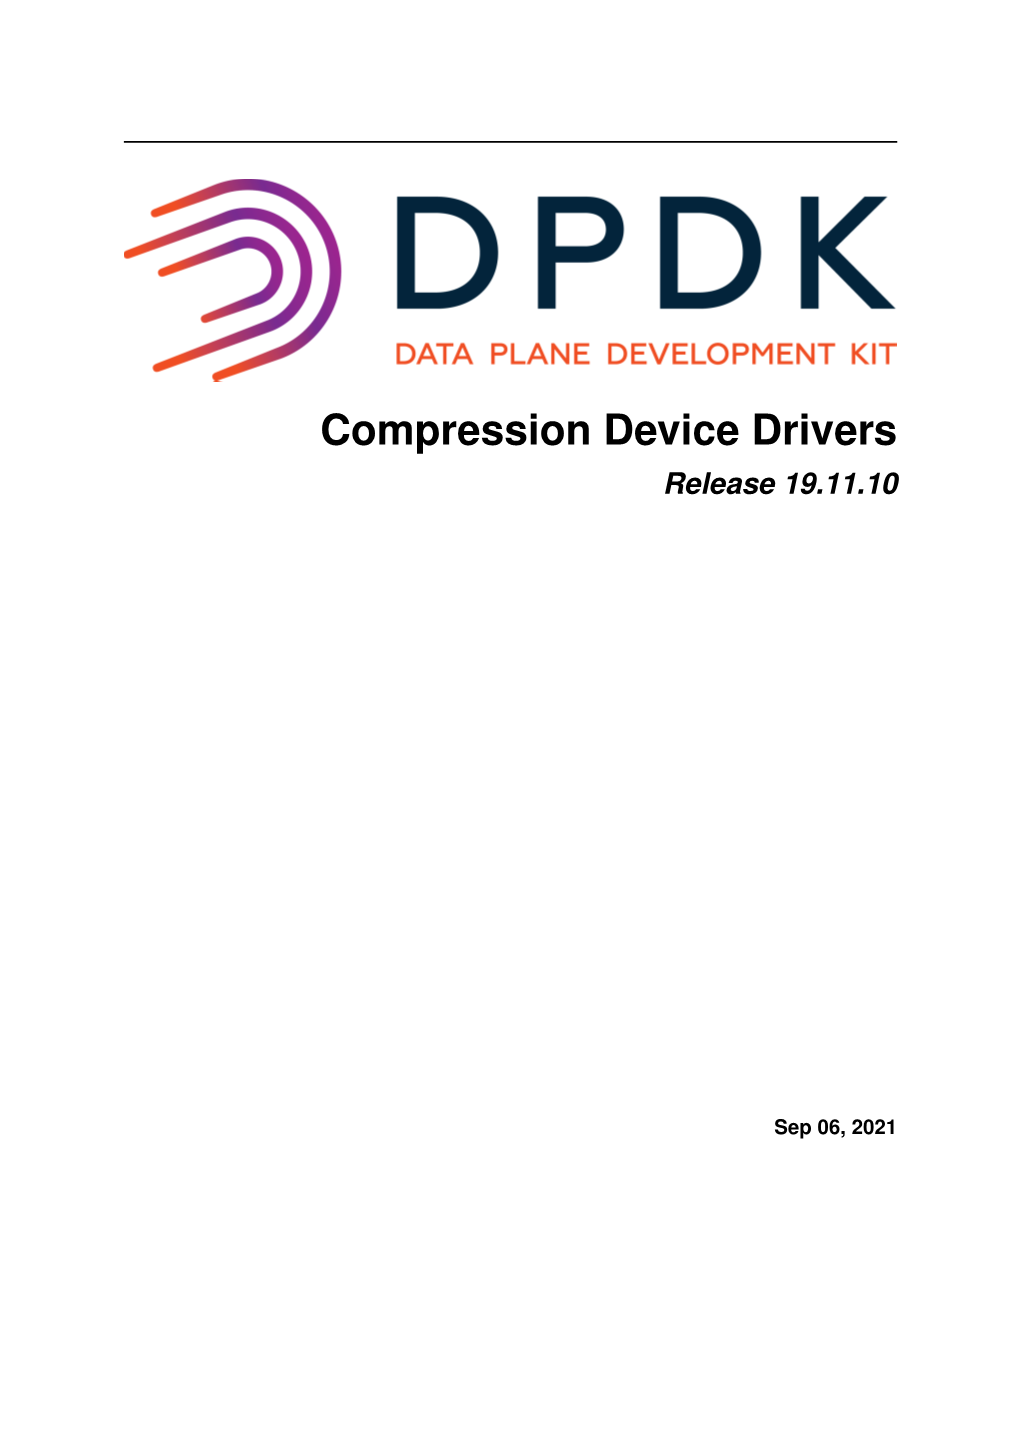 Compression Device Drivers Release 19.11.10